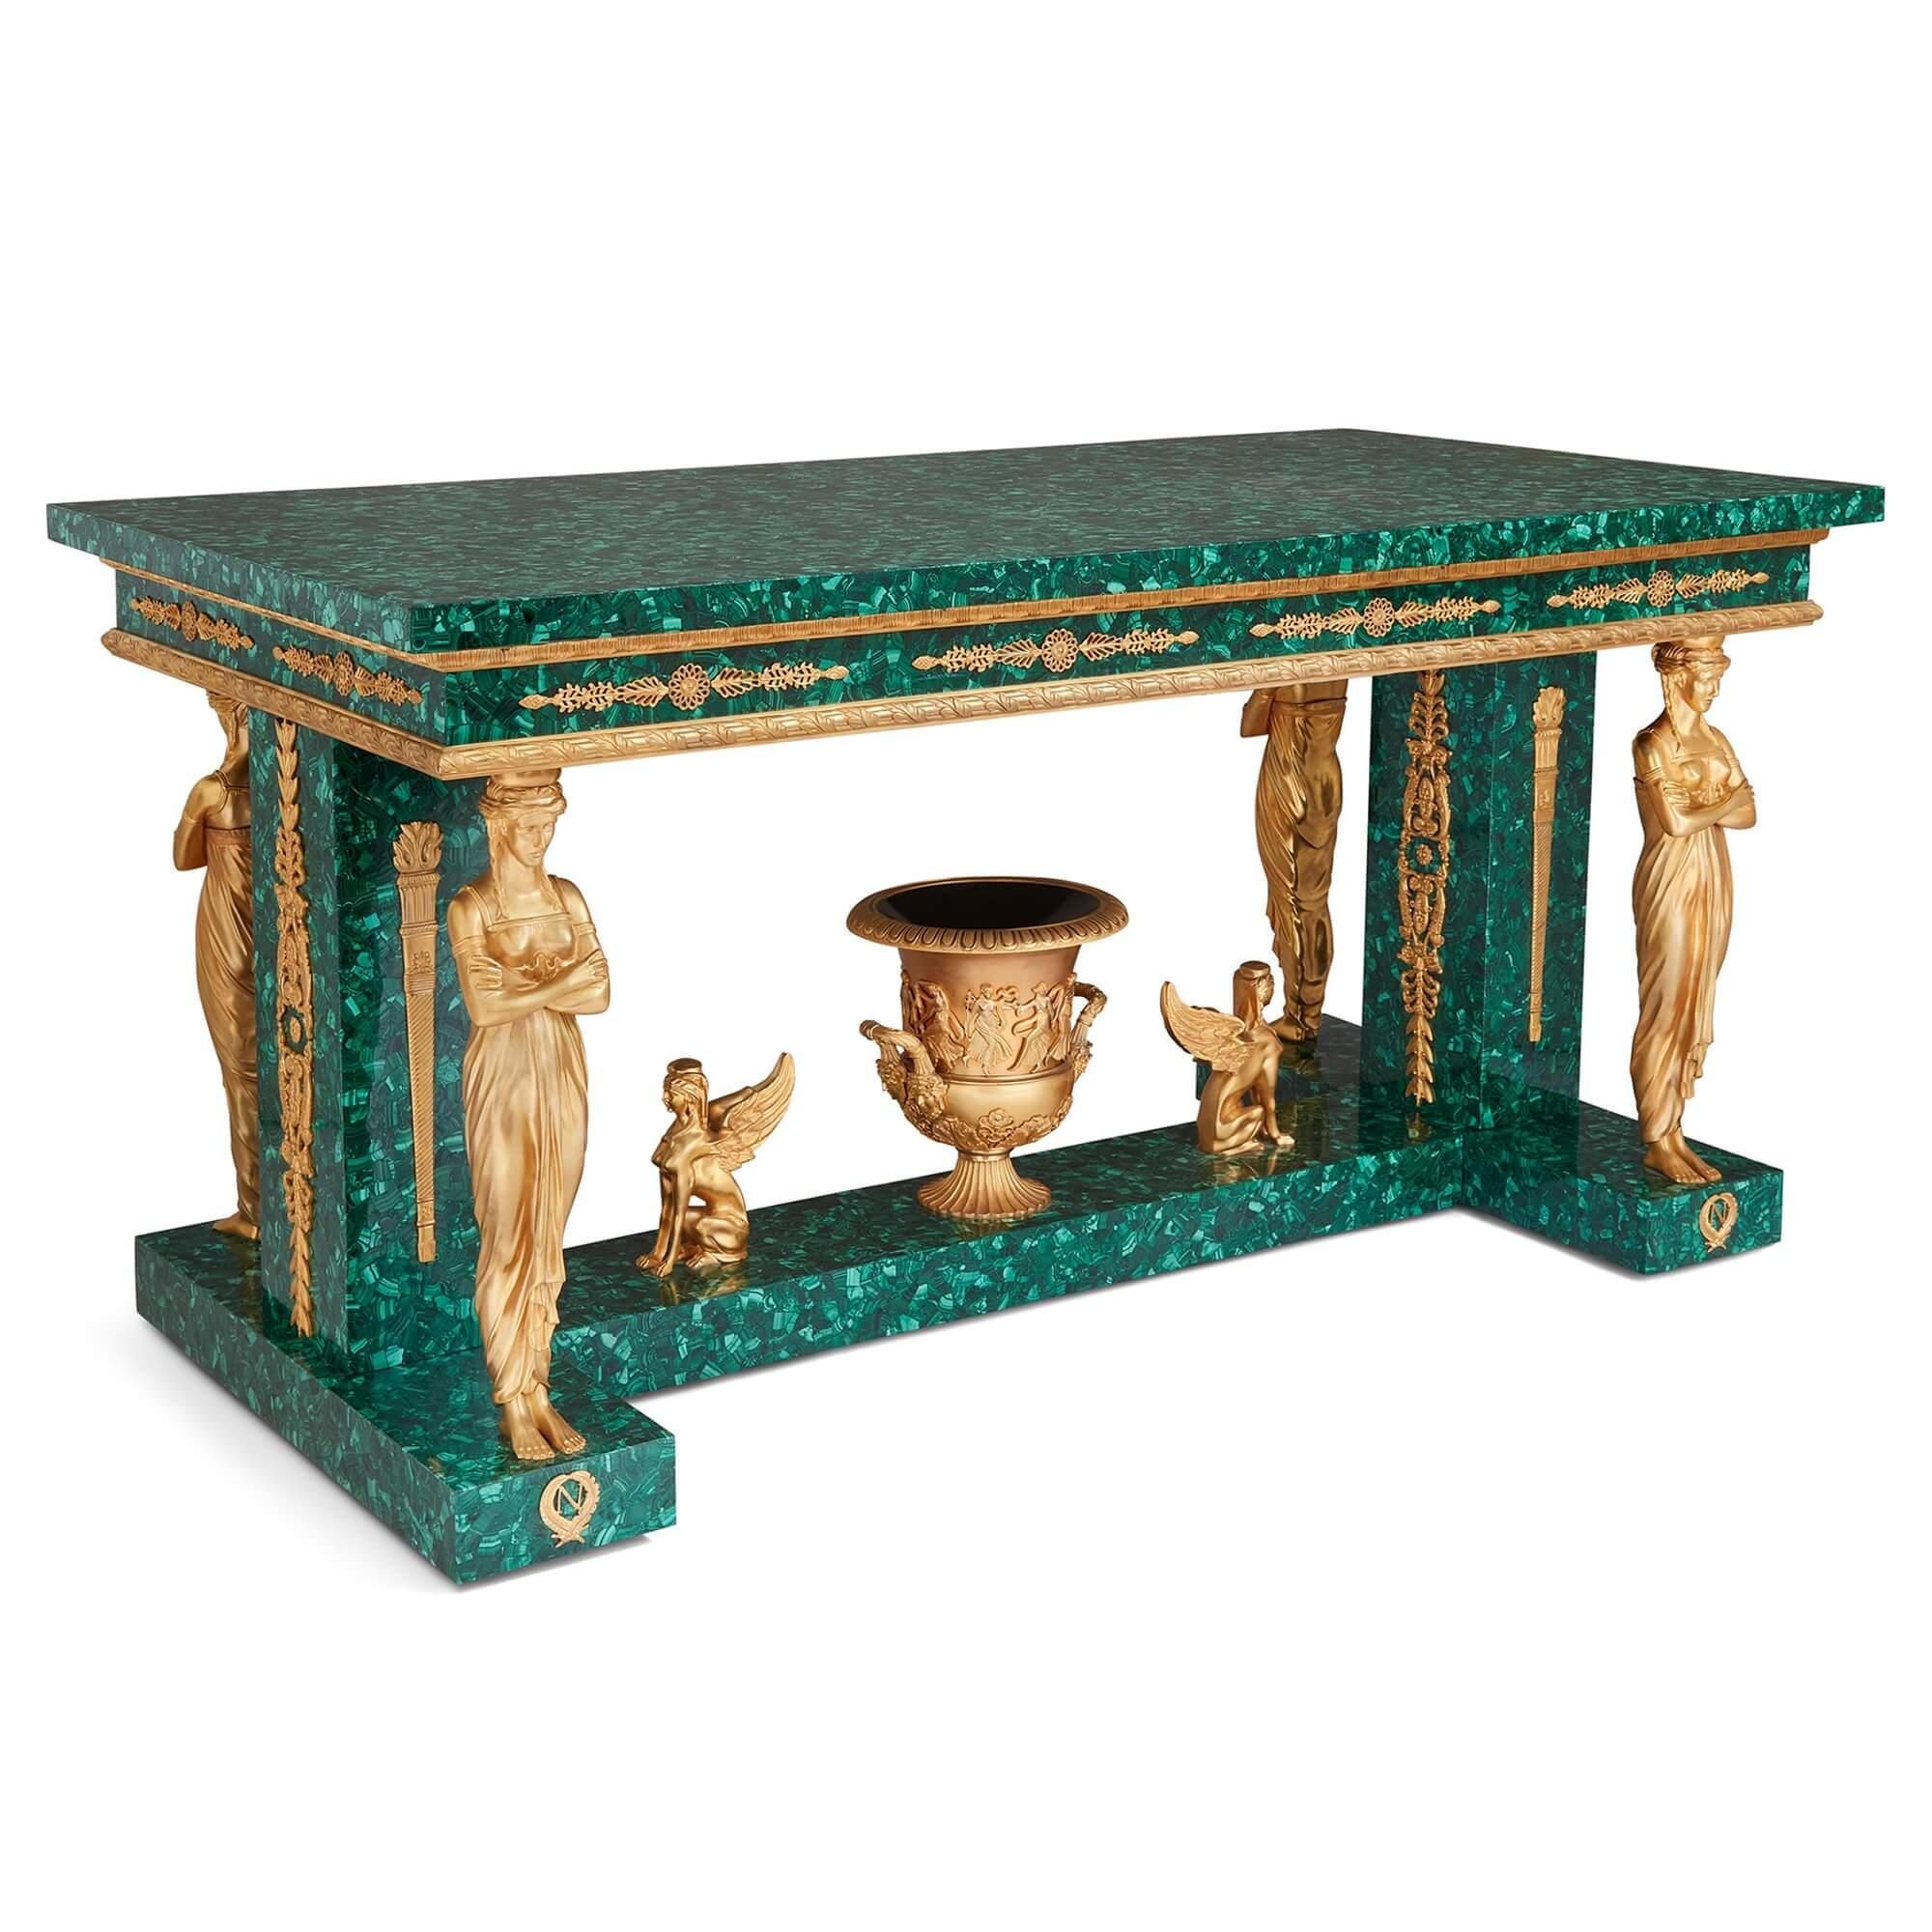 Large Empire-style ormolu and malachite centre table 
French, 20th Century
Height 85cm, width 165.5cm, depth 85.5cm

This superb centre table pairs vibrant malachite with classical ormolu mounts. The malachite tabletop sits atop a recessed malachite